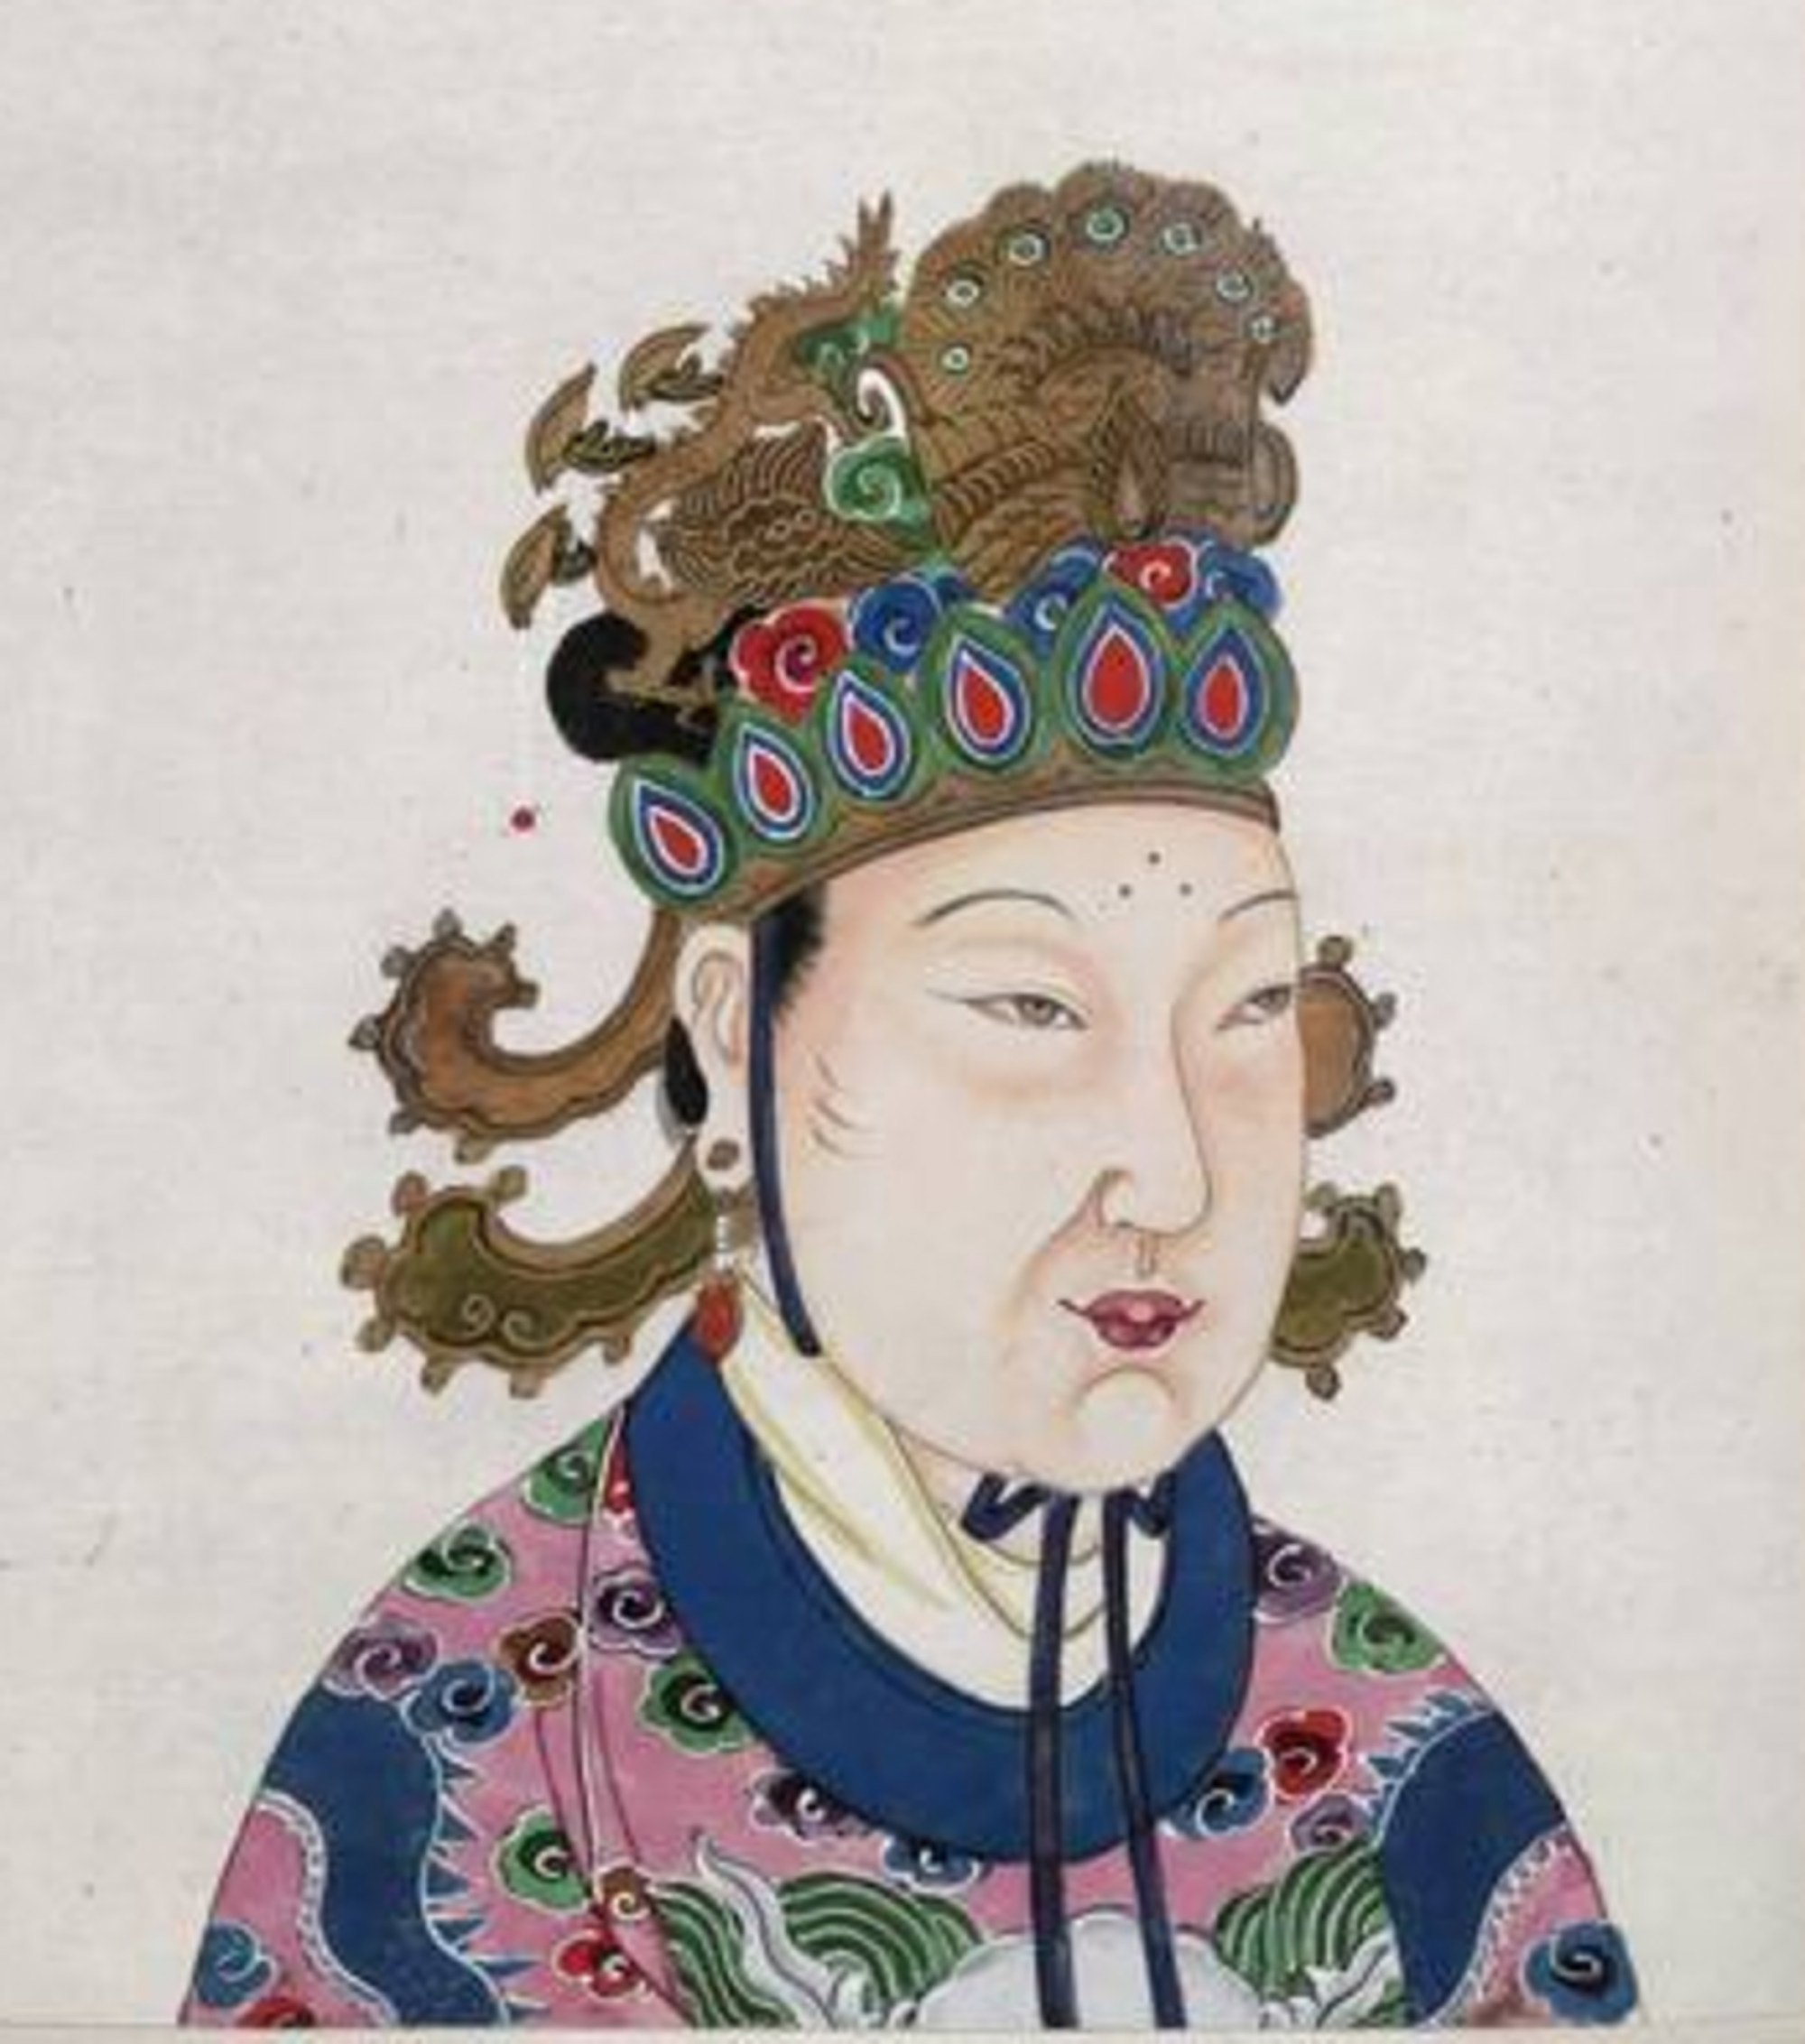 Empress Wu was considered one of China’s most ruthless emperors, though history has taught us that female rulers were often perceived as more harsh than their male counterparts. Photo: Handout